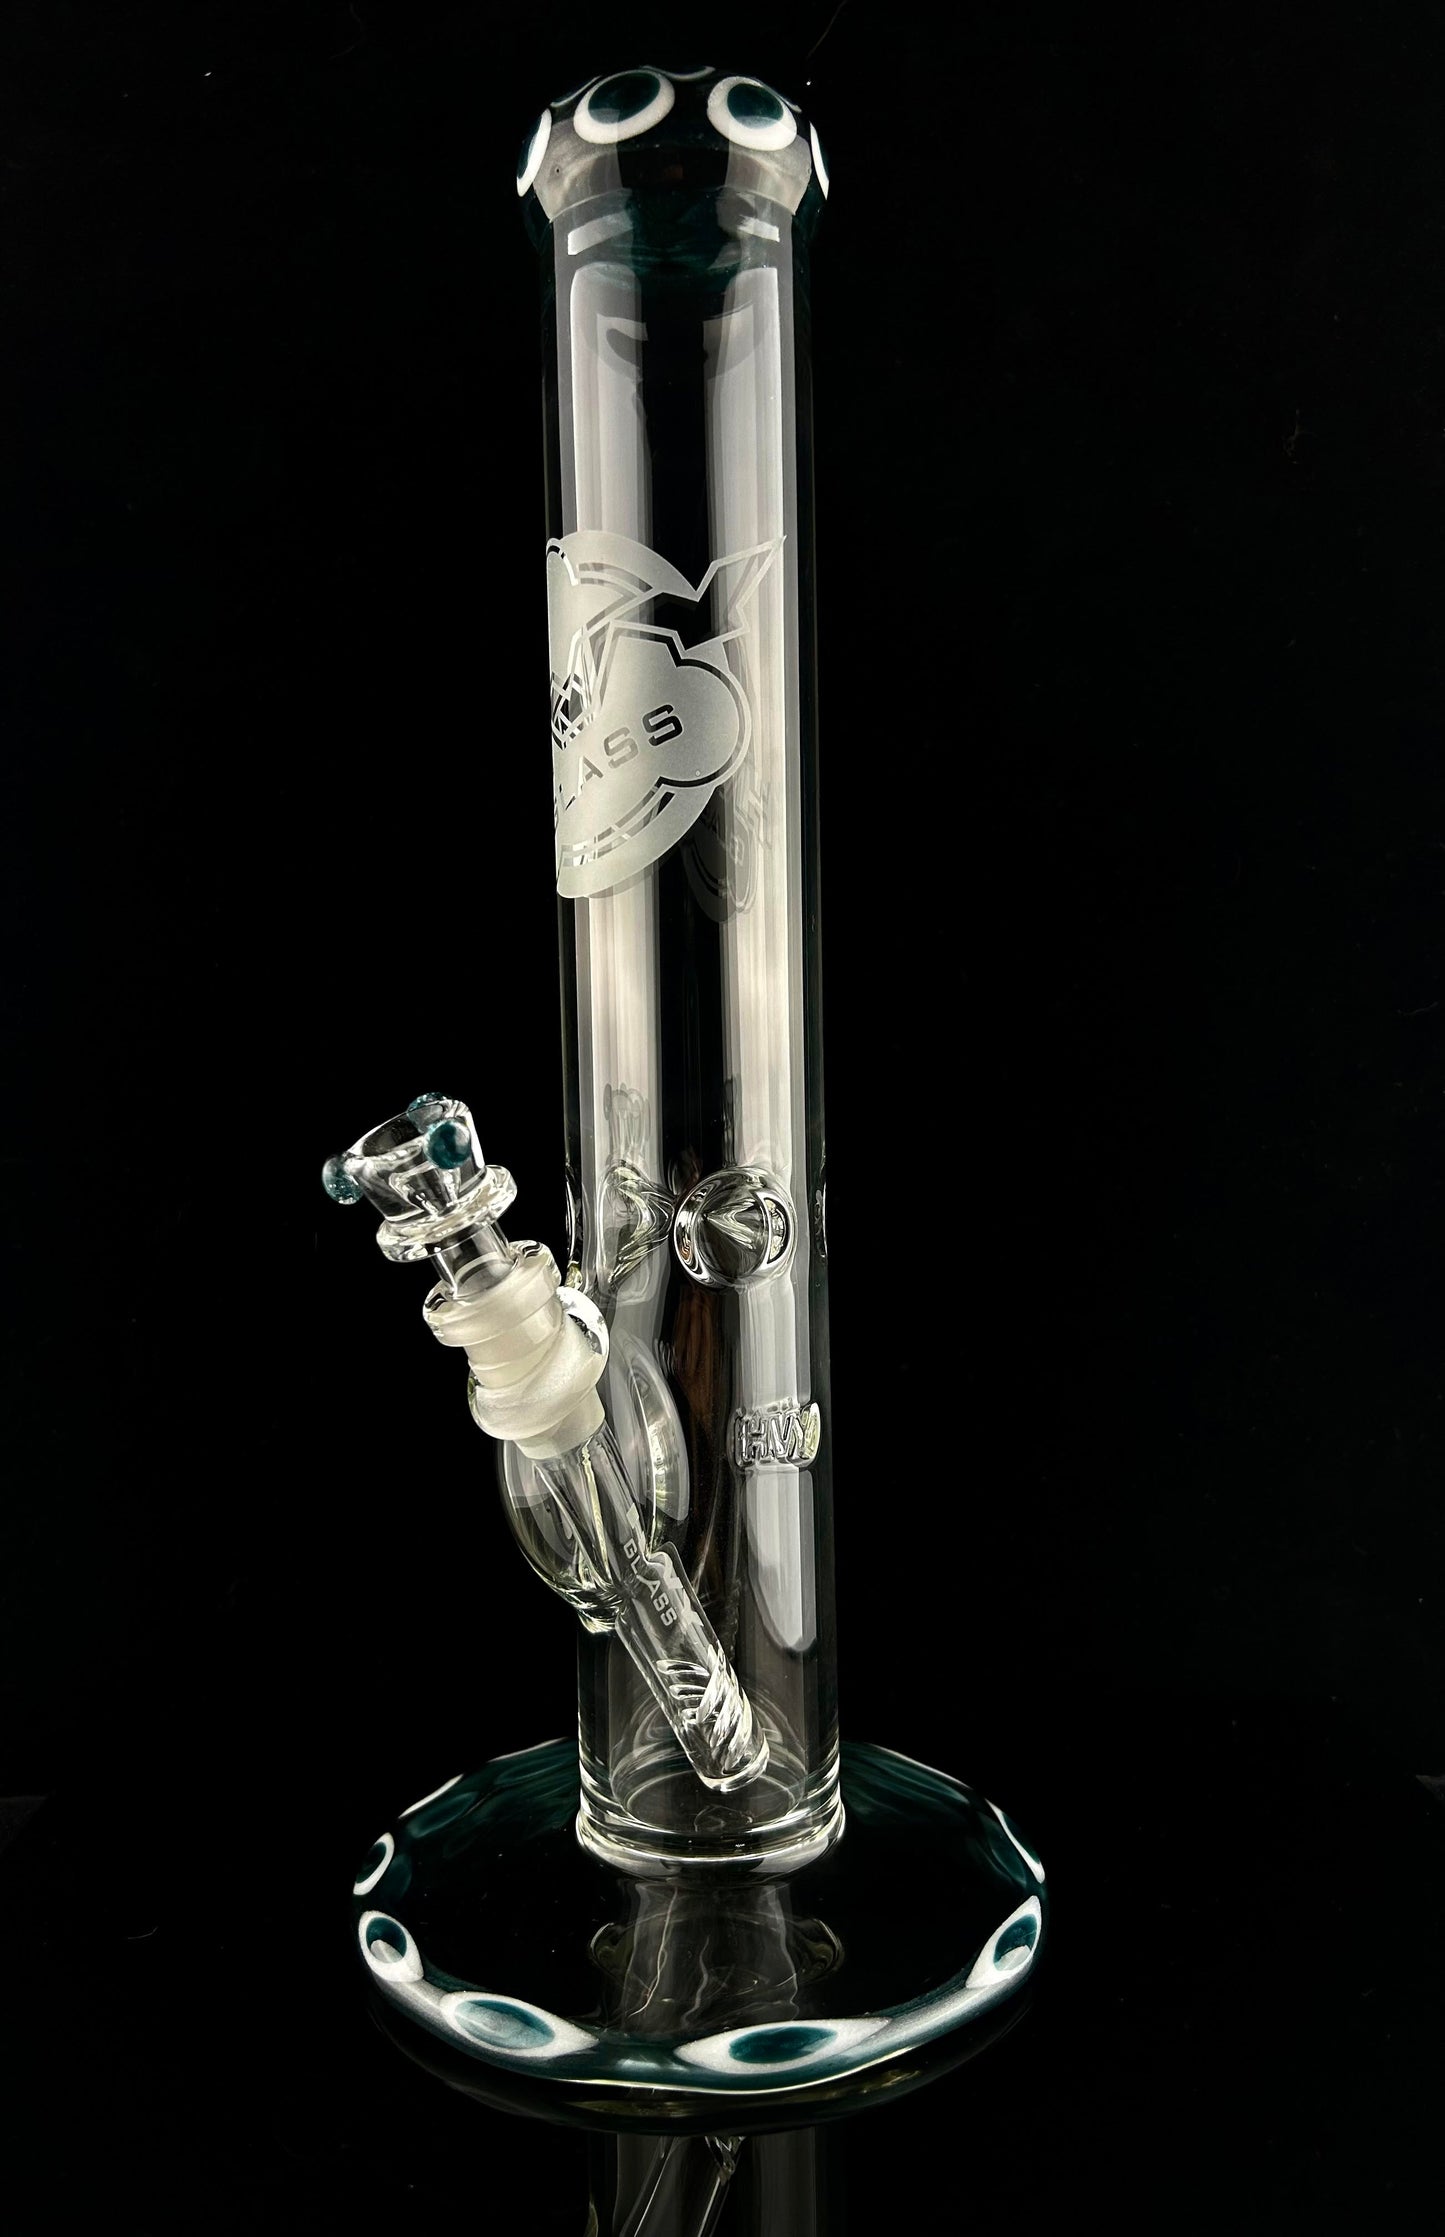 Hvy 12" 50mm straight with dotstack mouthpiece and foot